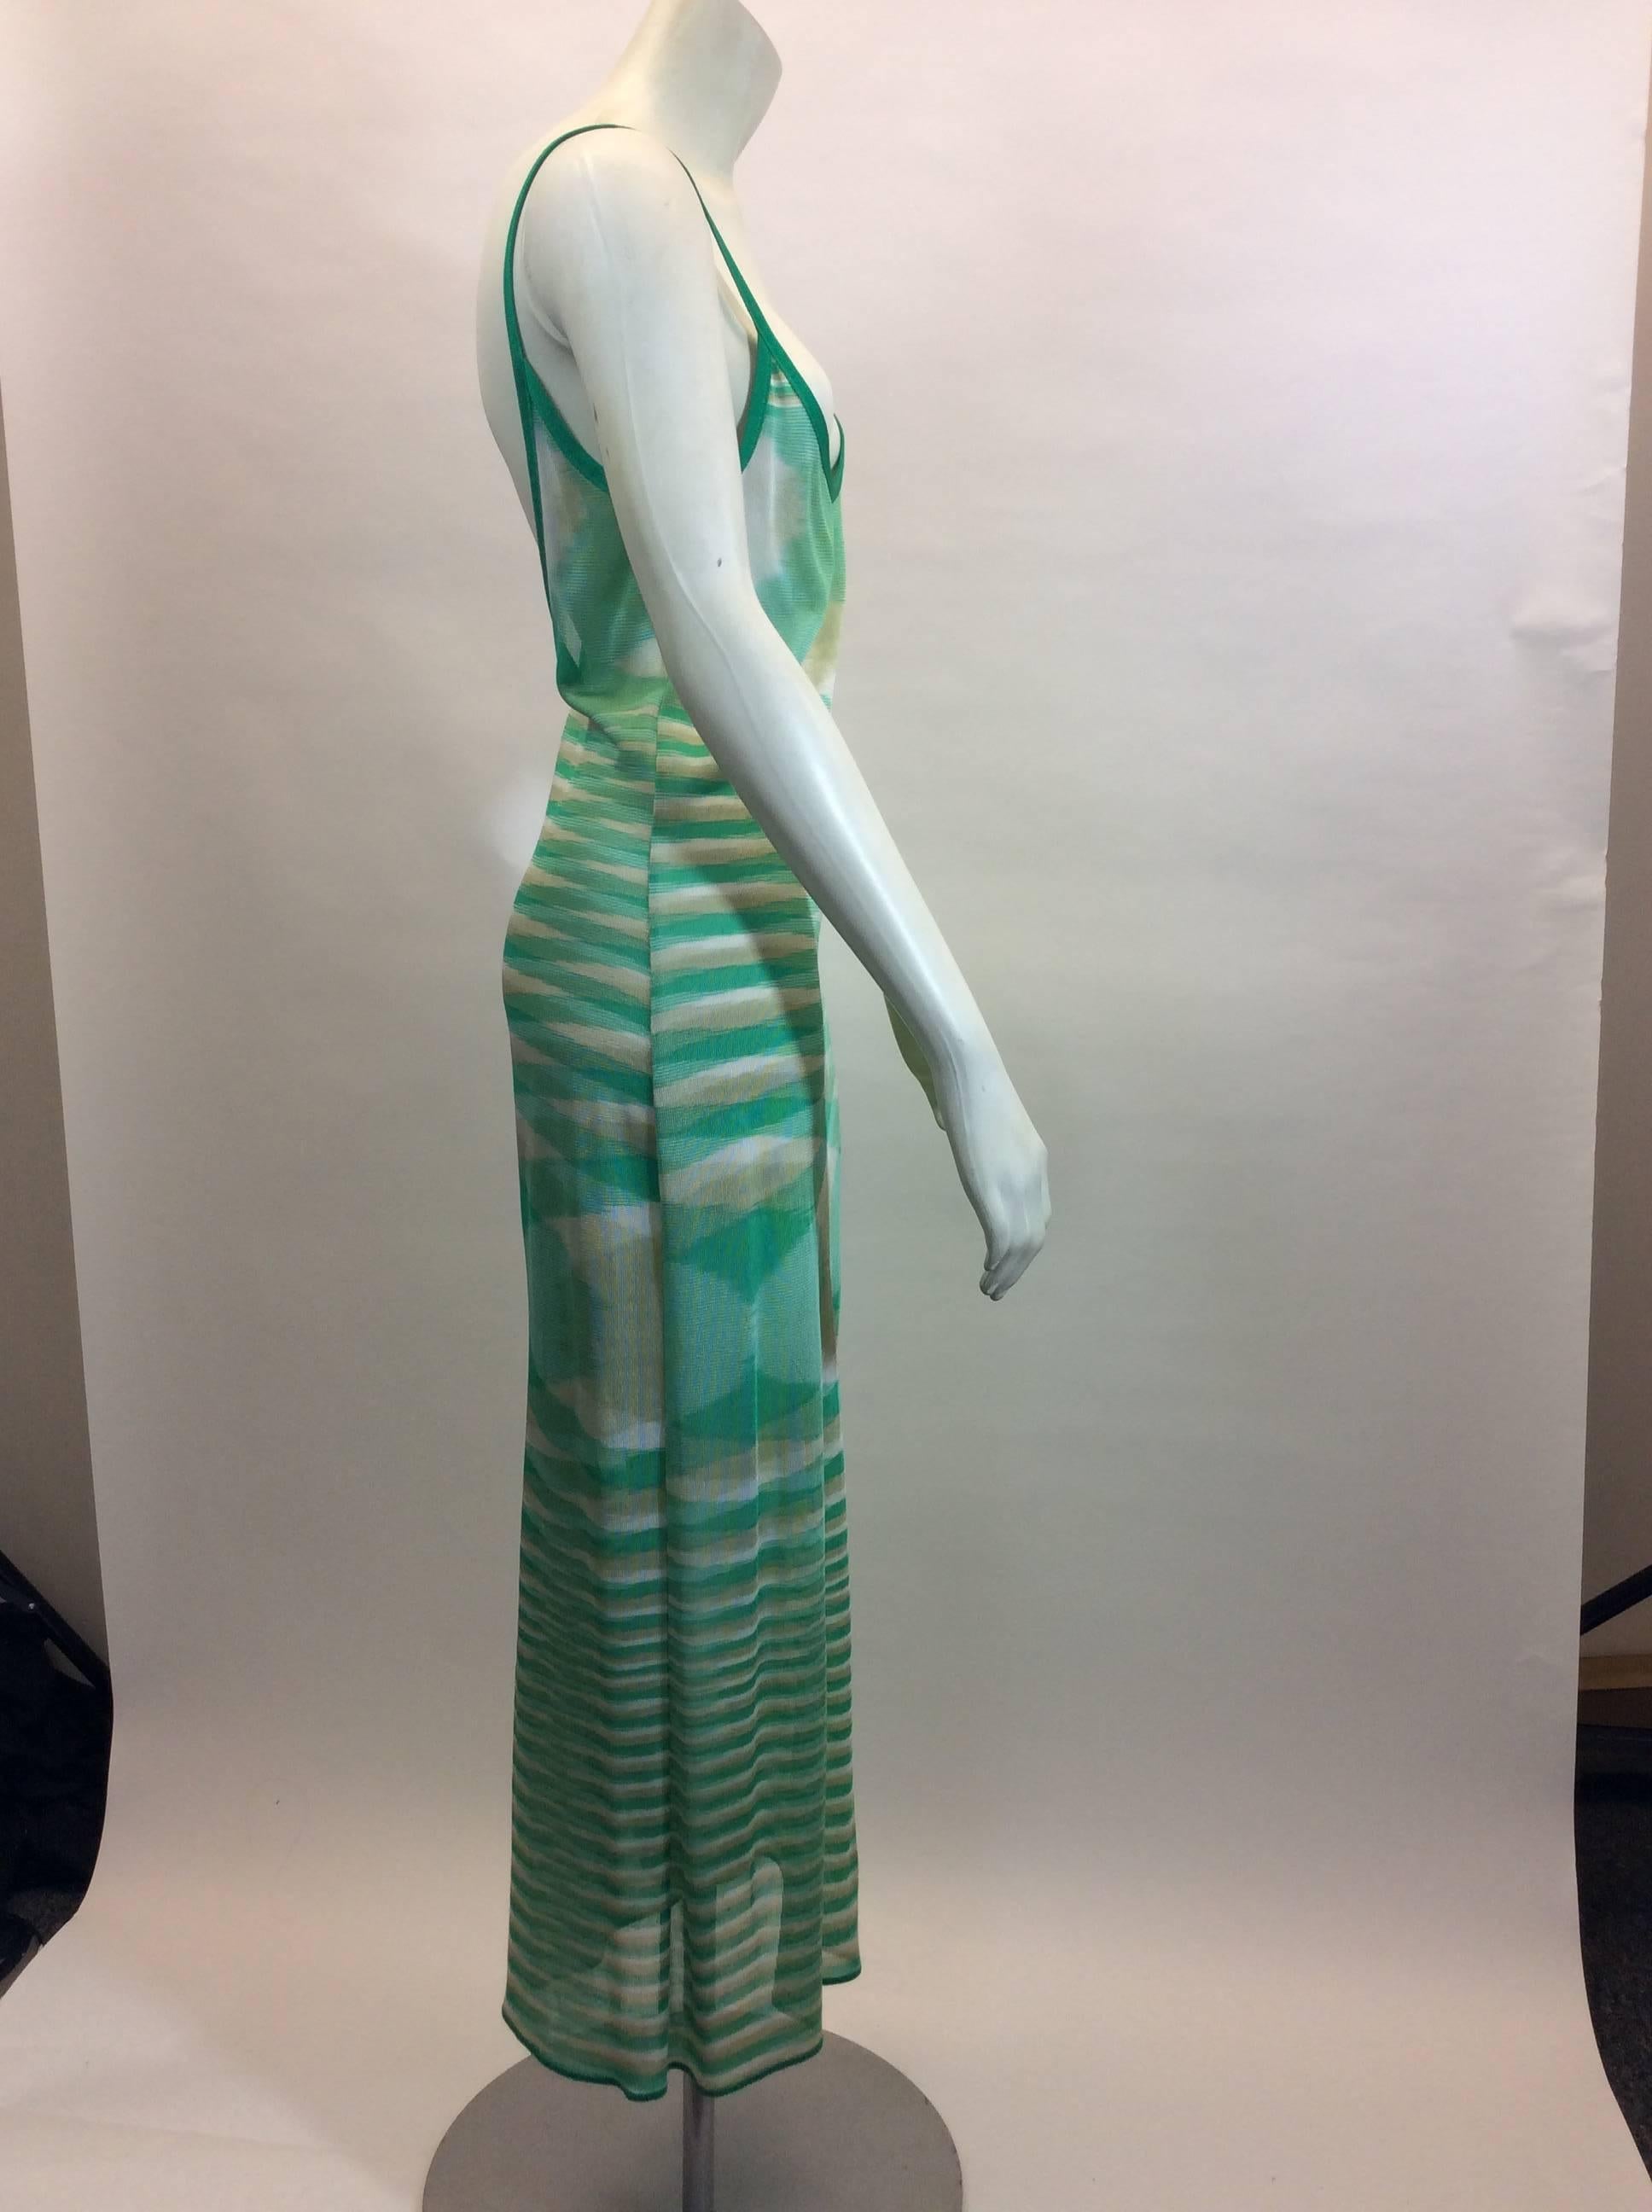 Missoni Dress
Size 42
Low back - noted in photo
Knit, 100% Rayon
Mint and cream stripe
Made in Italy